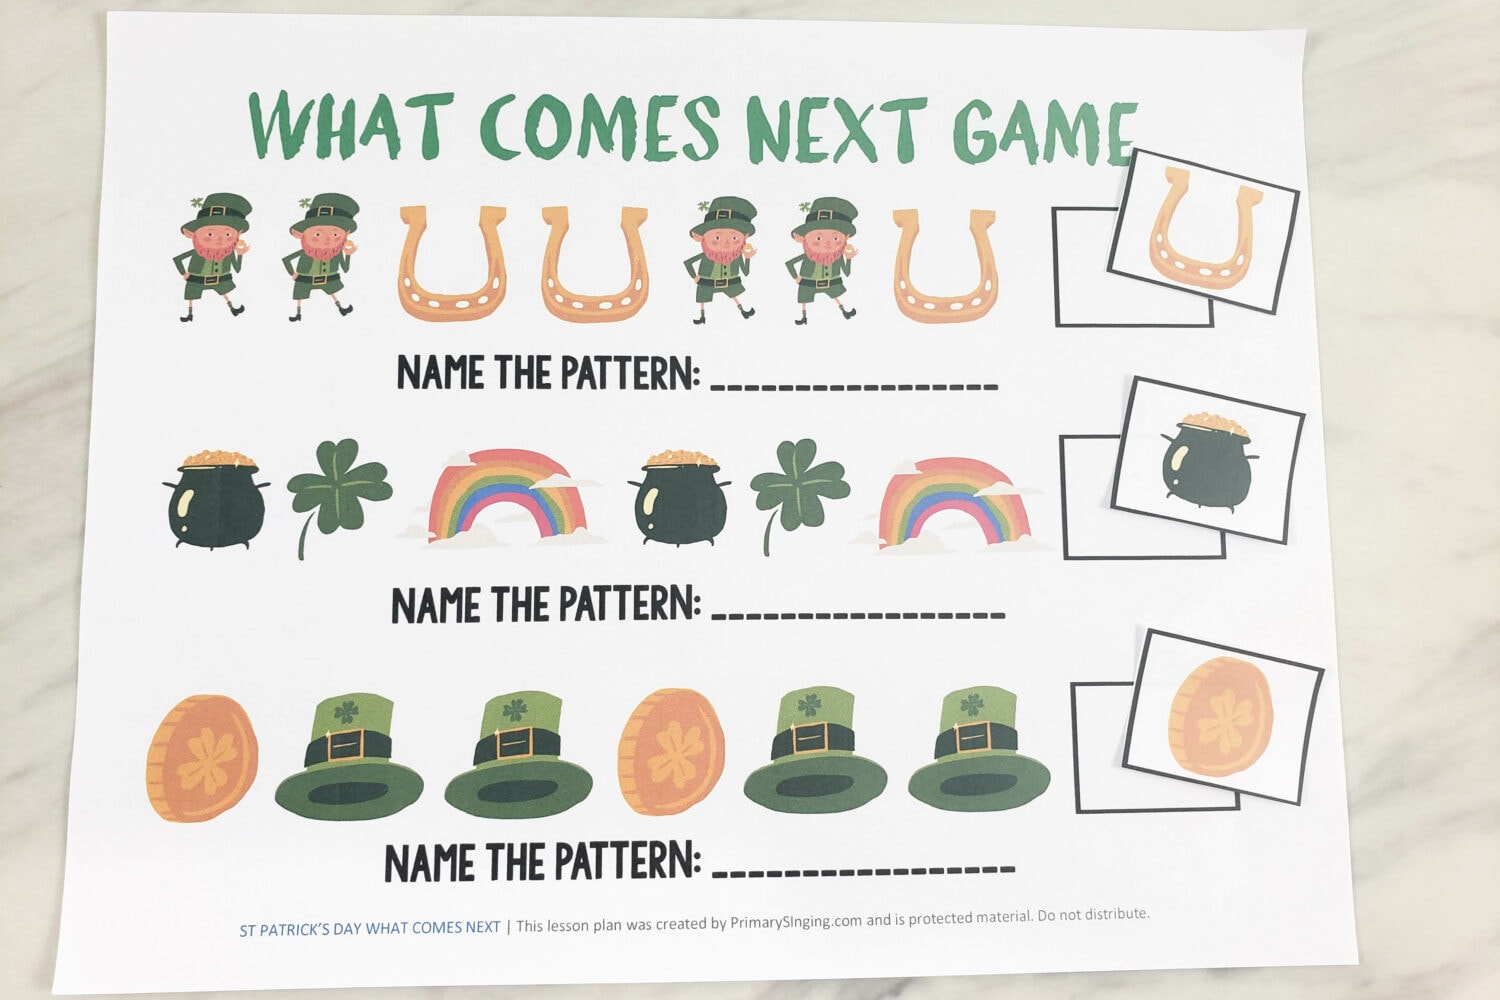 St Patrick's Day What Comes Next singing time idea to review one of the themed songs or use this activity with any song you'd like. Printable lesson plan for Primary music leaders.